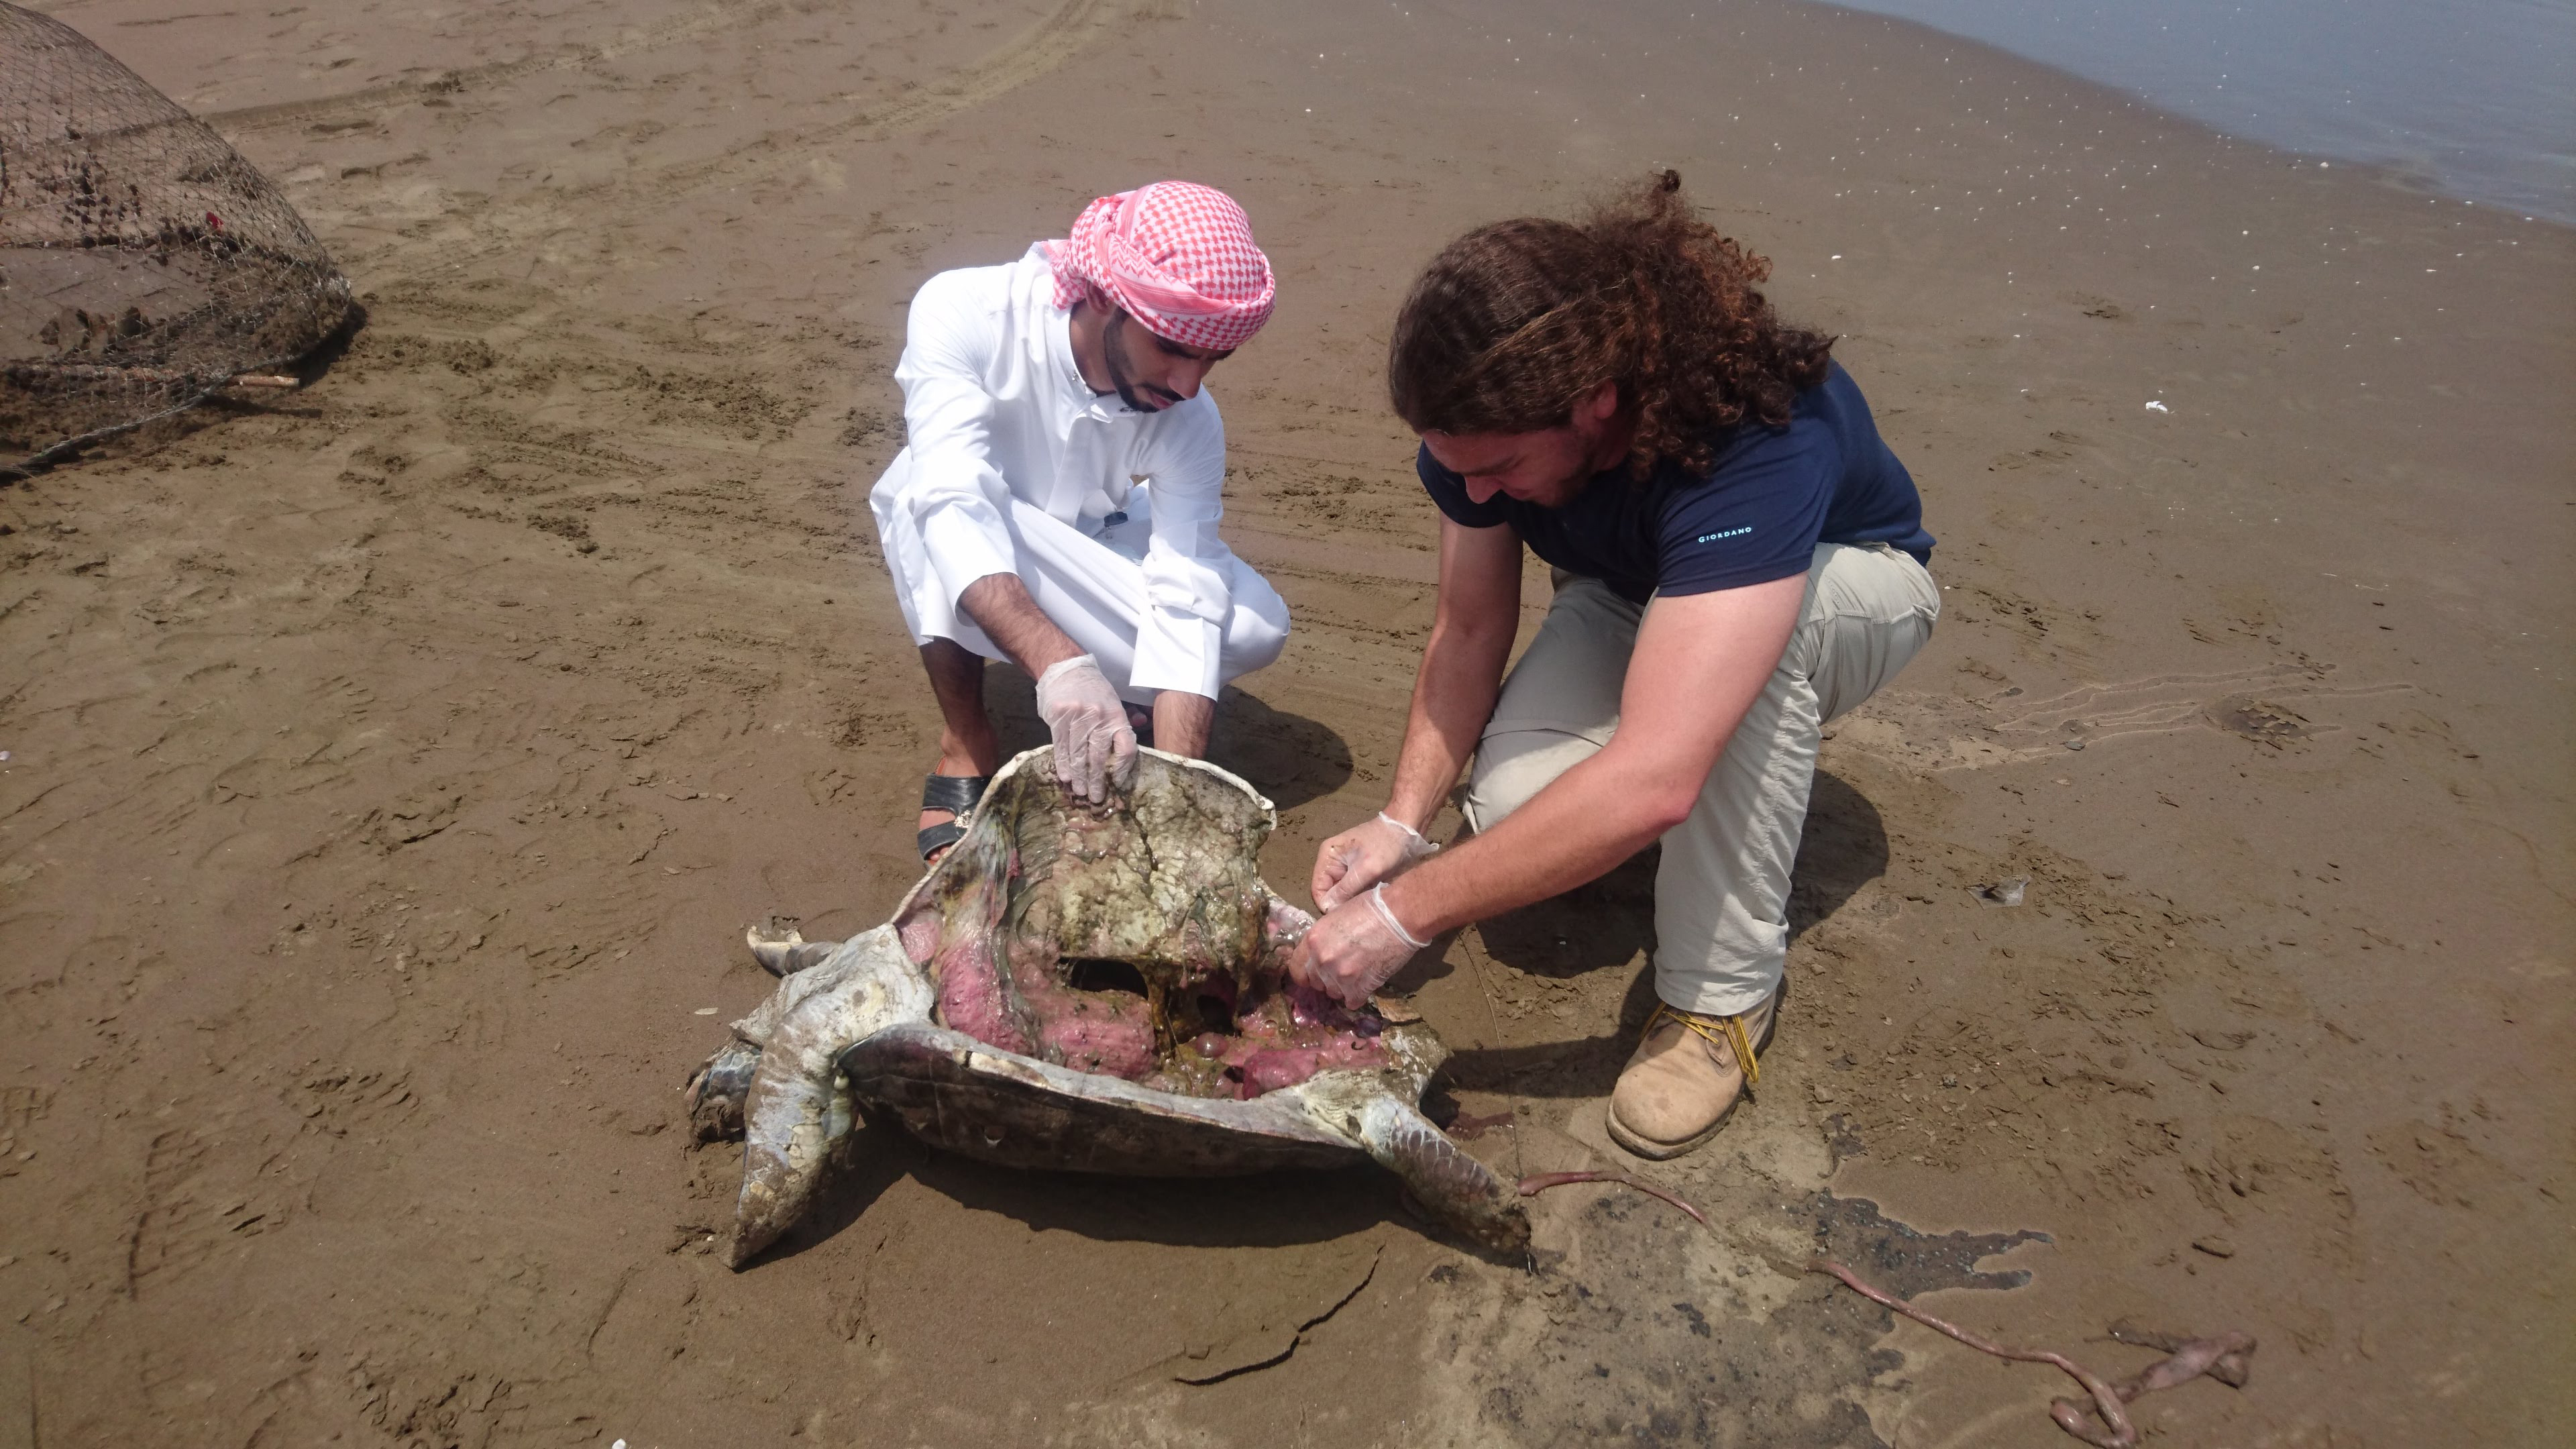 Majority of turtles found dead in Sharjah ate plastic waste, study finds